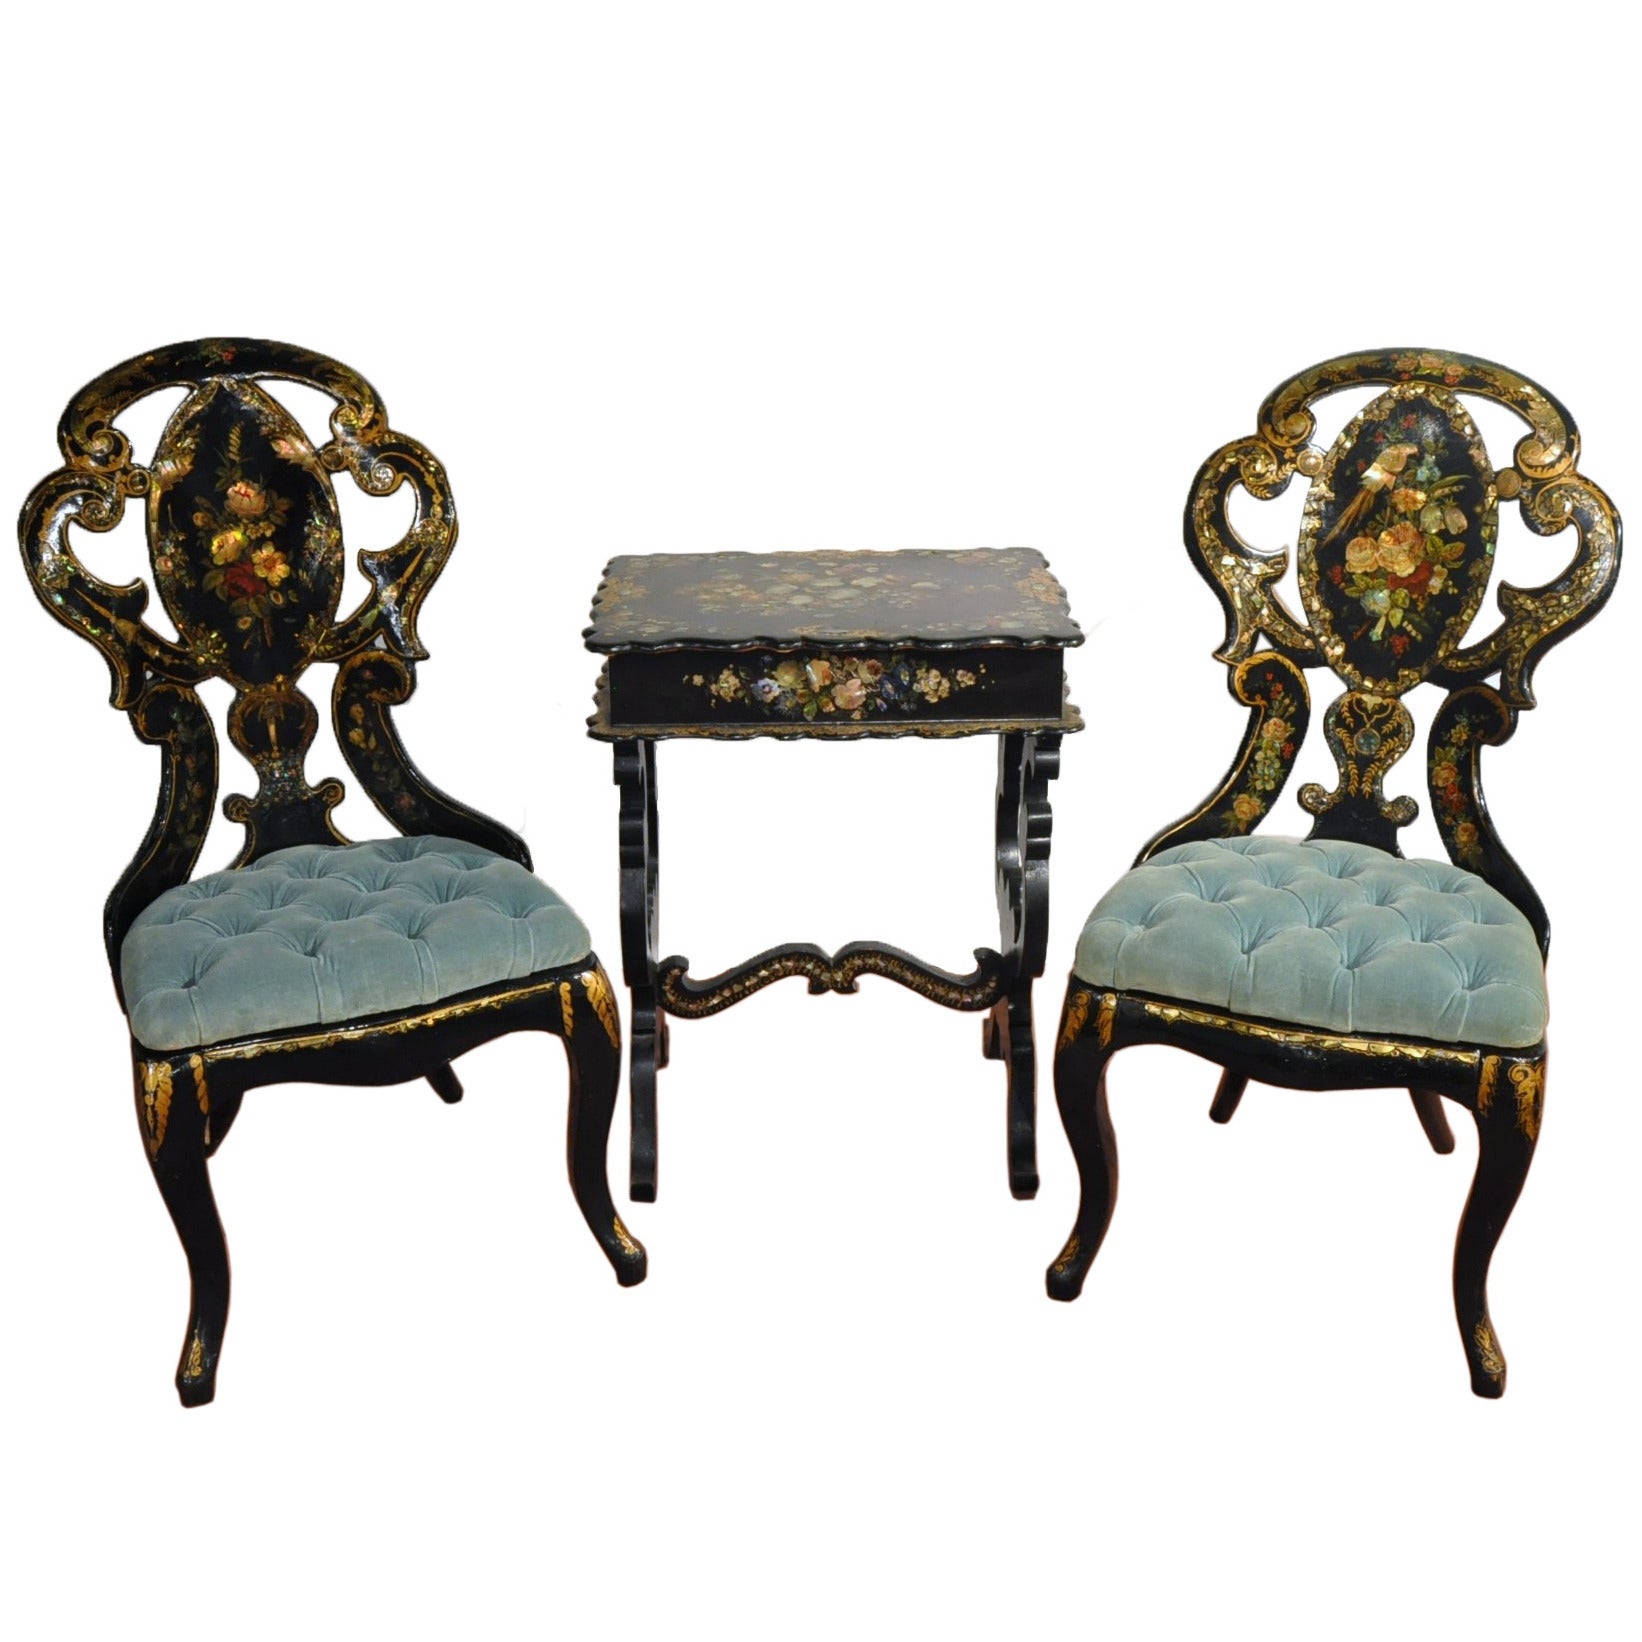 19th Century French Lacquered Gilt and Mother of Pearl Chairs and Table Set